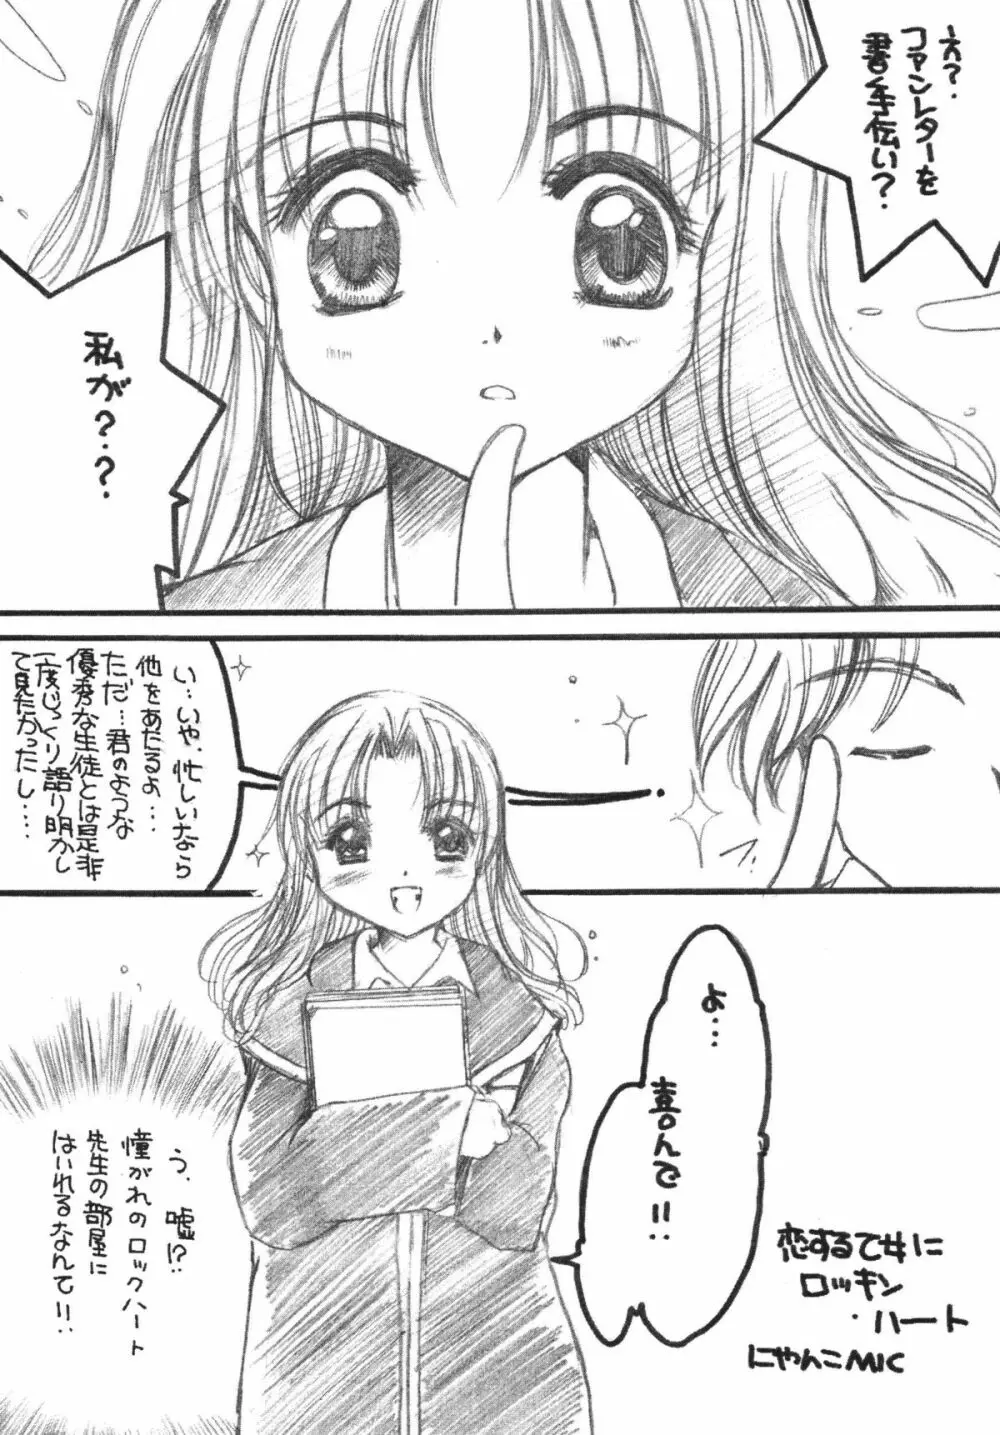 THE ロリータ SPECIAL 4 69ページ